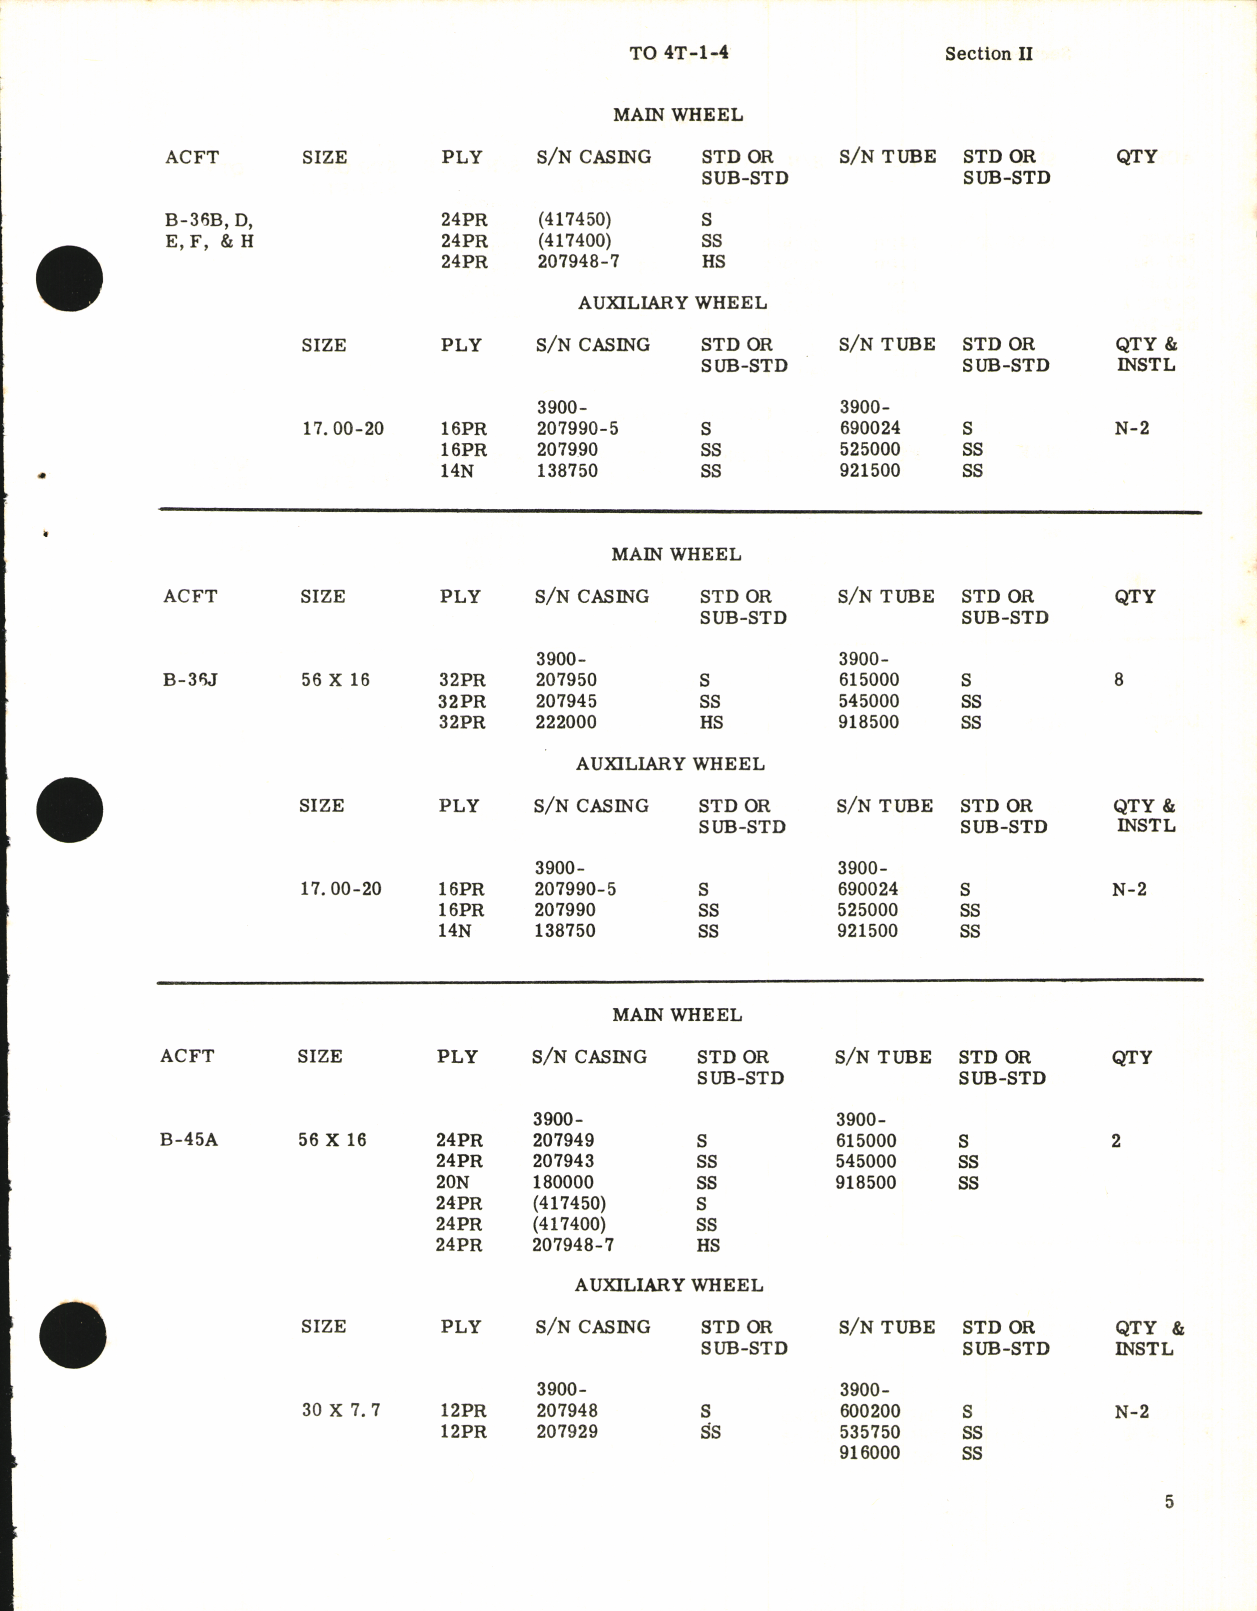 Sample page 7 from AirCorps Library document: Application Table for Aircraft Tire Casings and Tubes